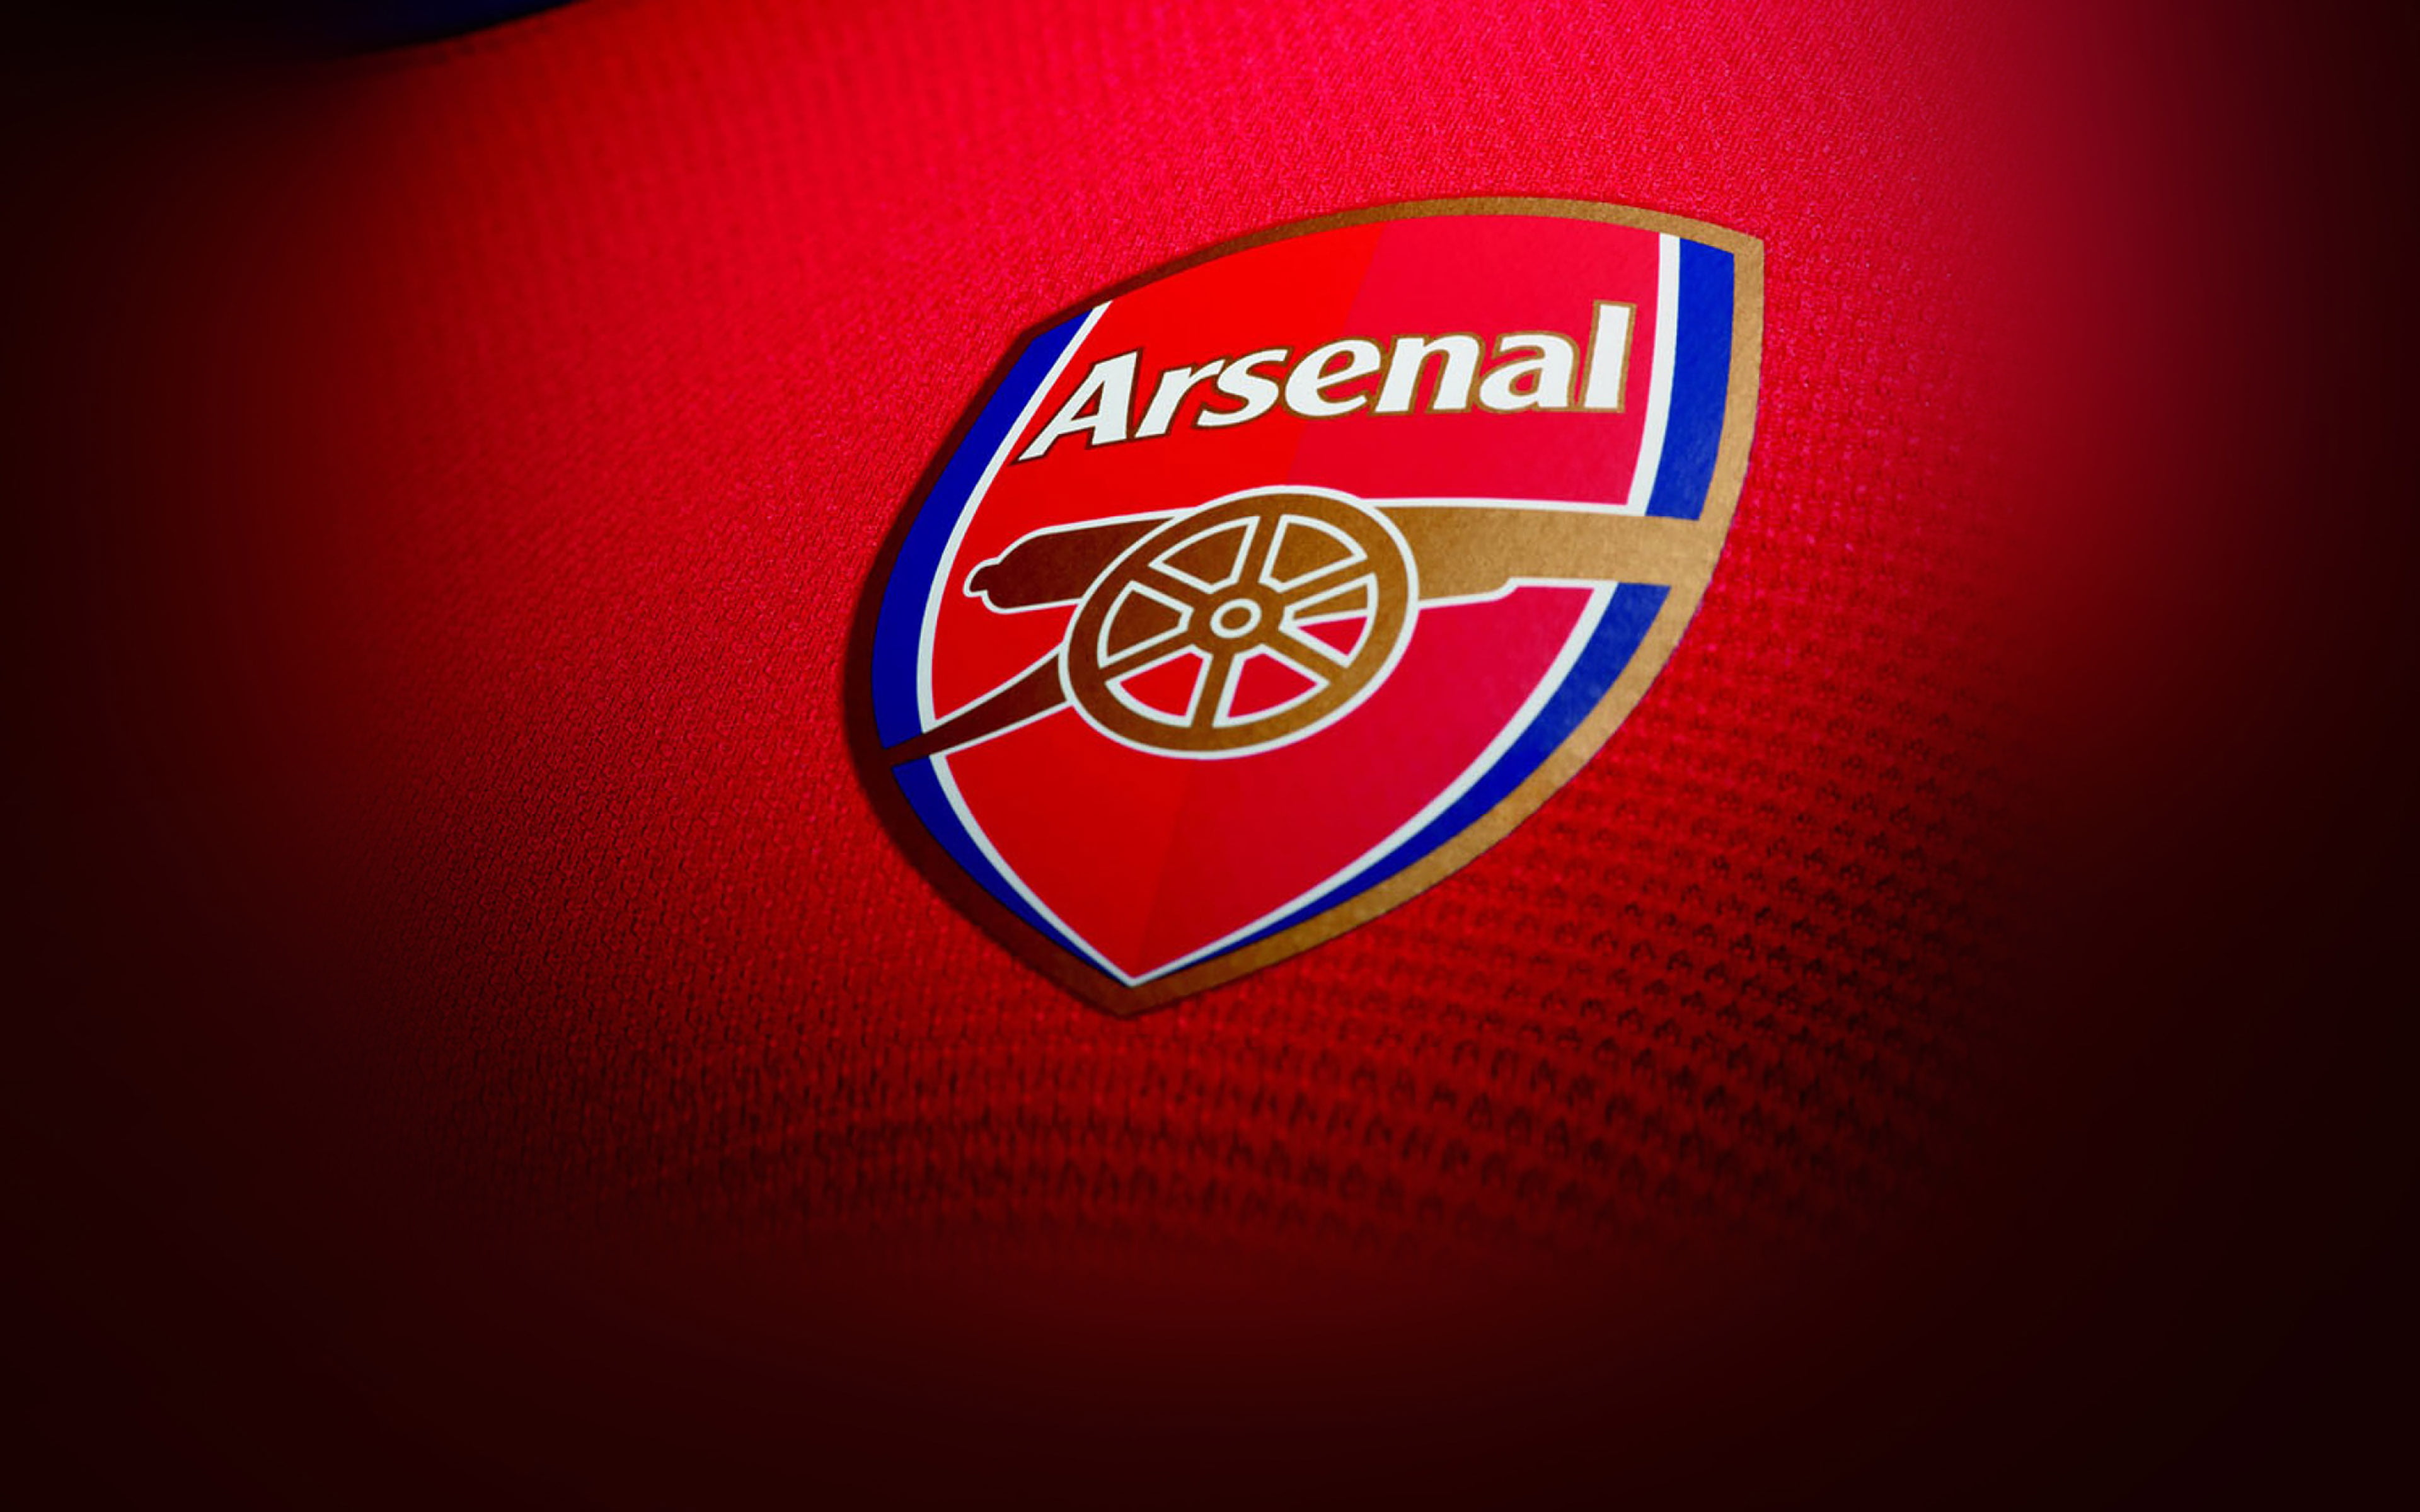 arsenal, football, england, soccer, sports, logo, red, no people